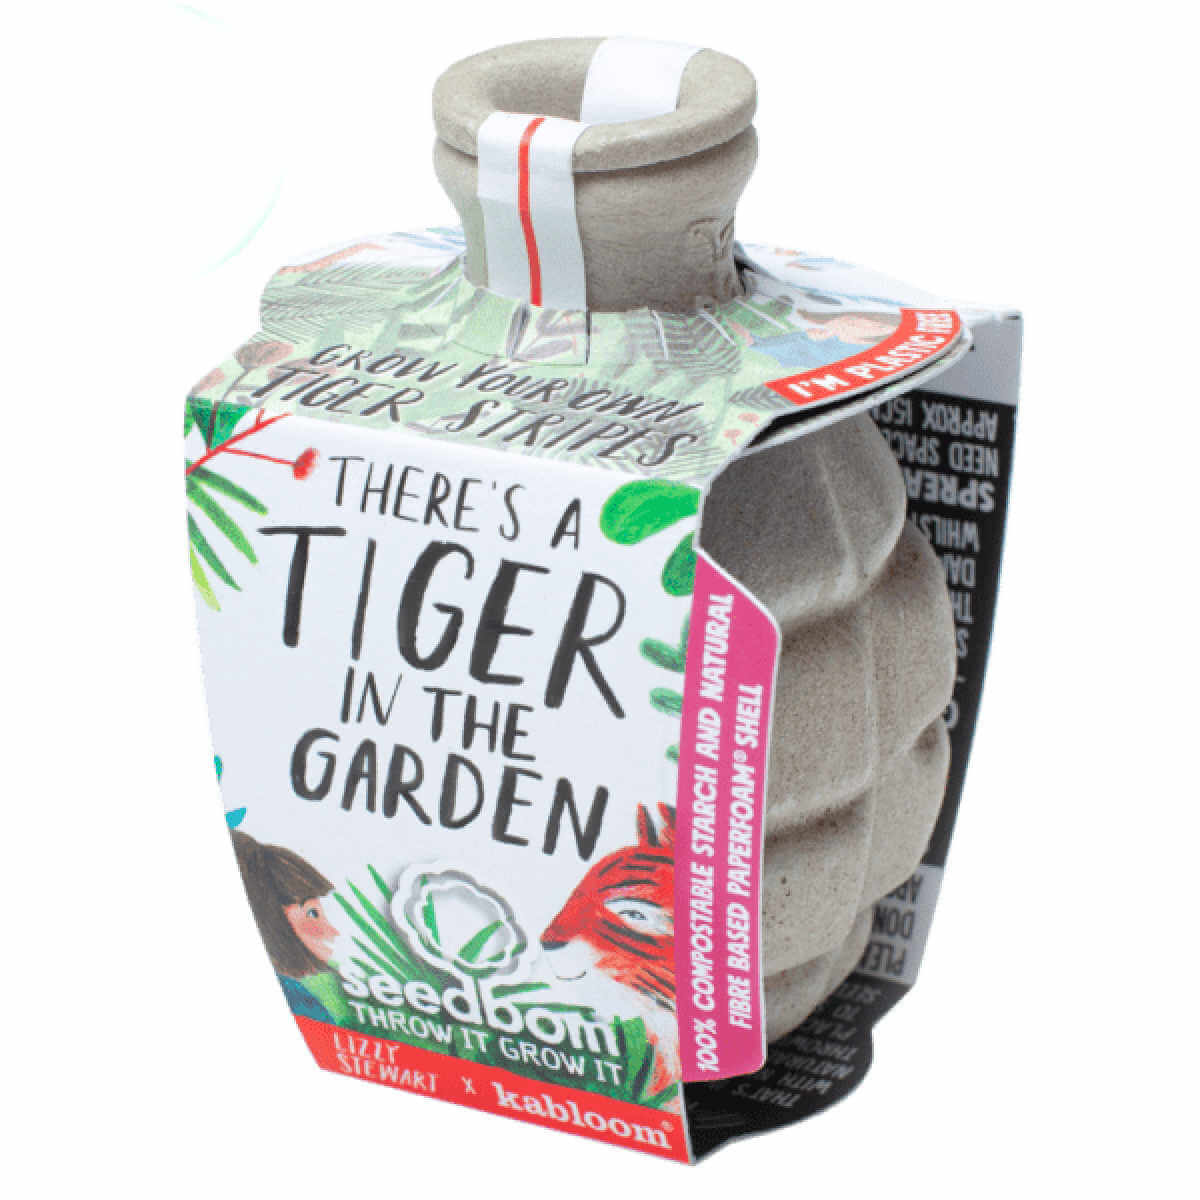 theres-a-tiger-in-the-garden-seedboms-kabloom-uk